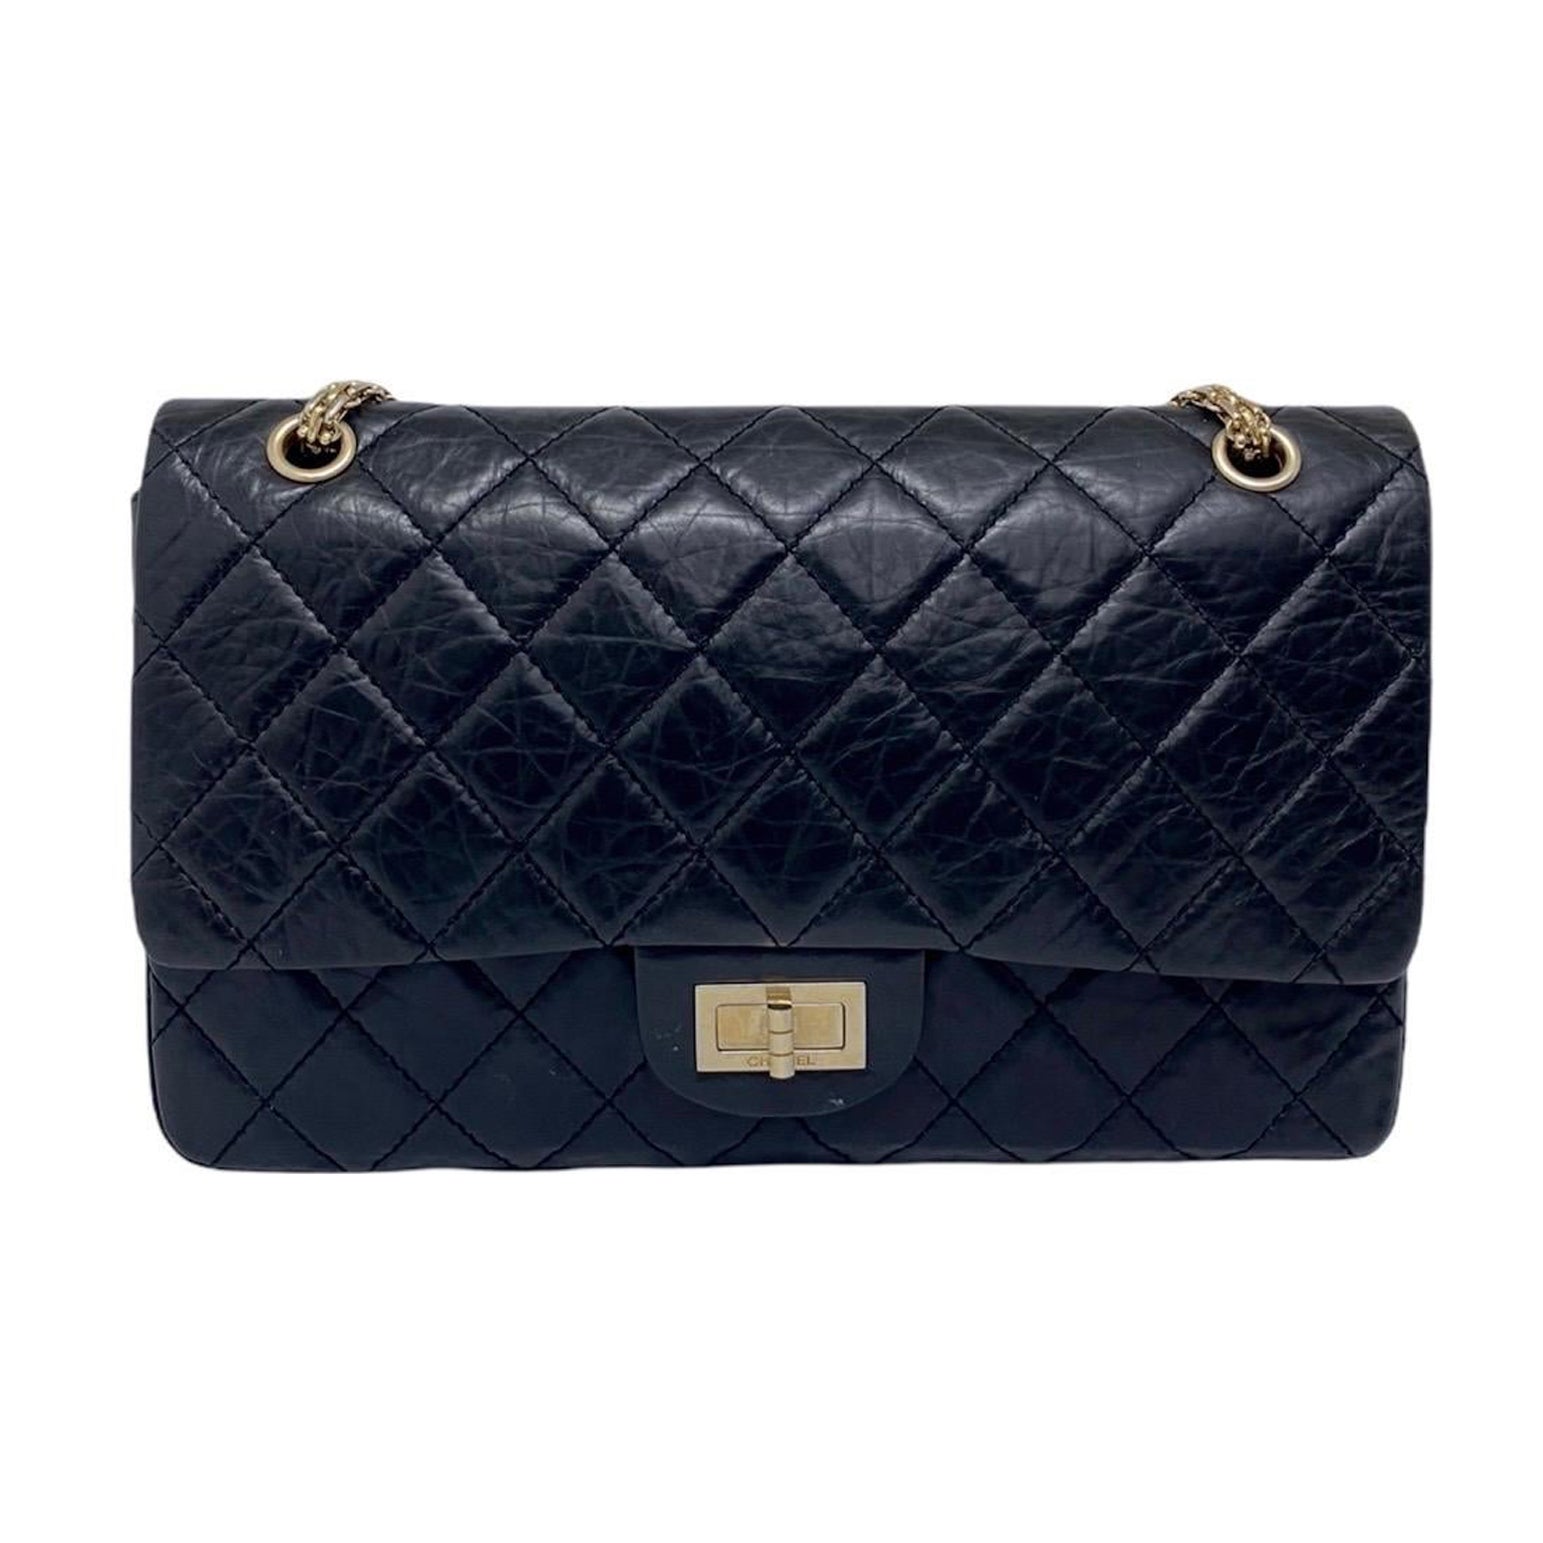 Chanel Black Leather 2.55 Limited Edition Bag